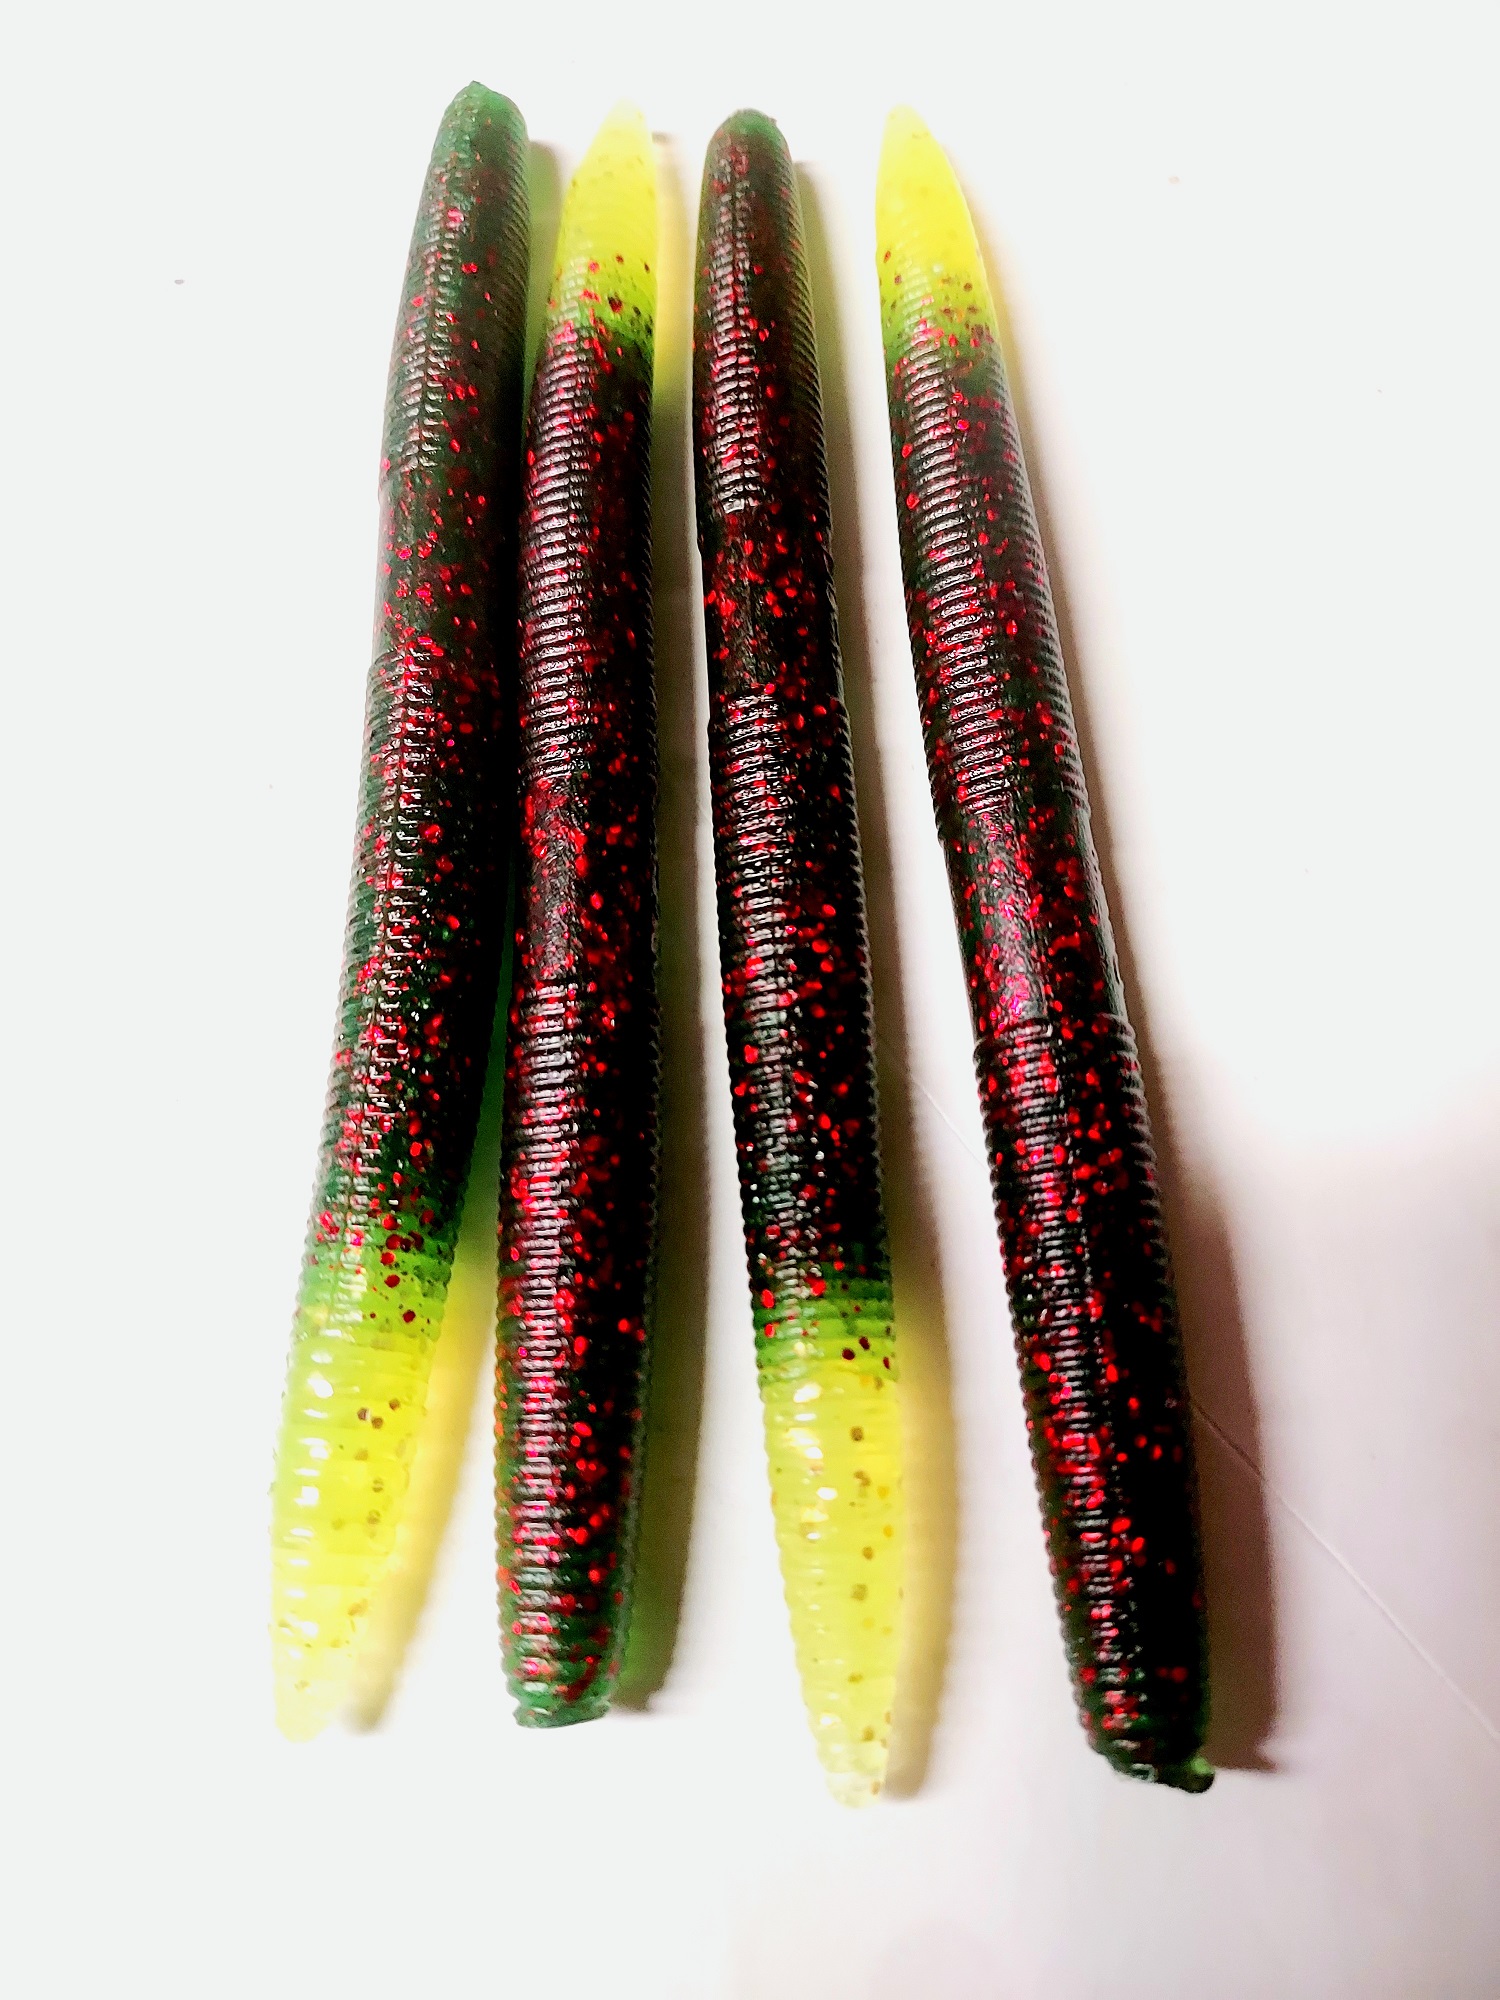 Stick bait 6 inches . All tails will be chartreuse. The main body will be  watermelon red. We call the 6 inch baits Papa - Get Hooked Magic Baits